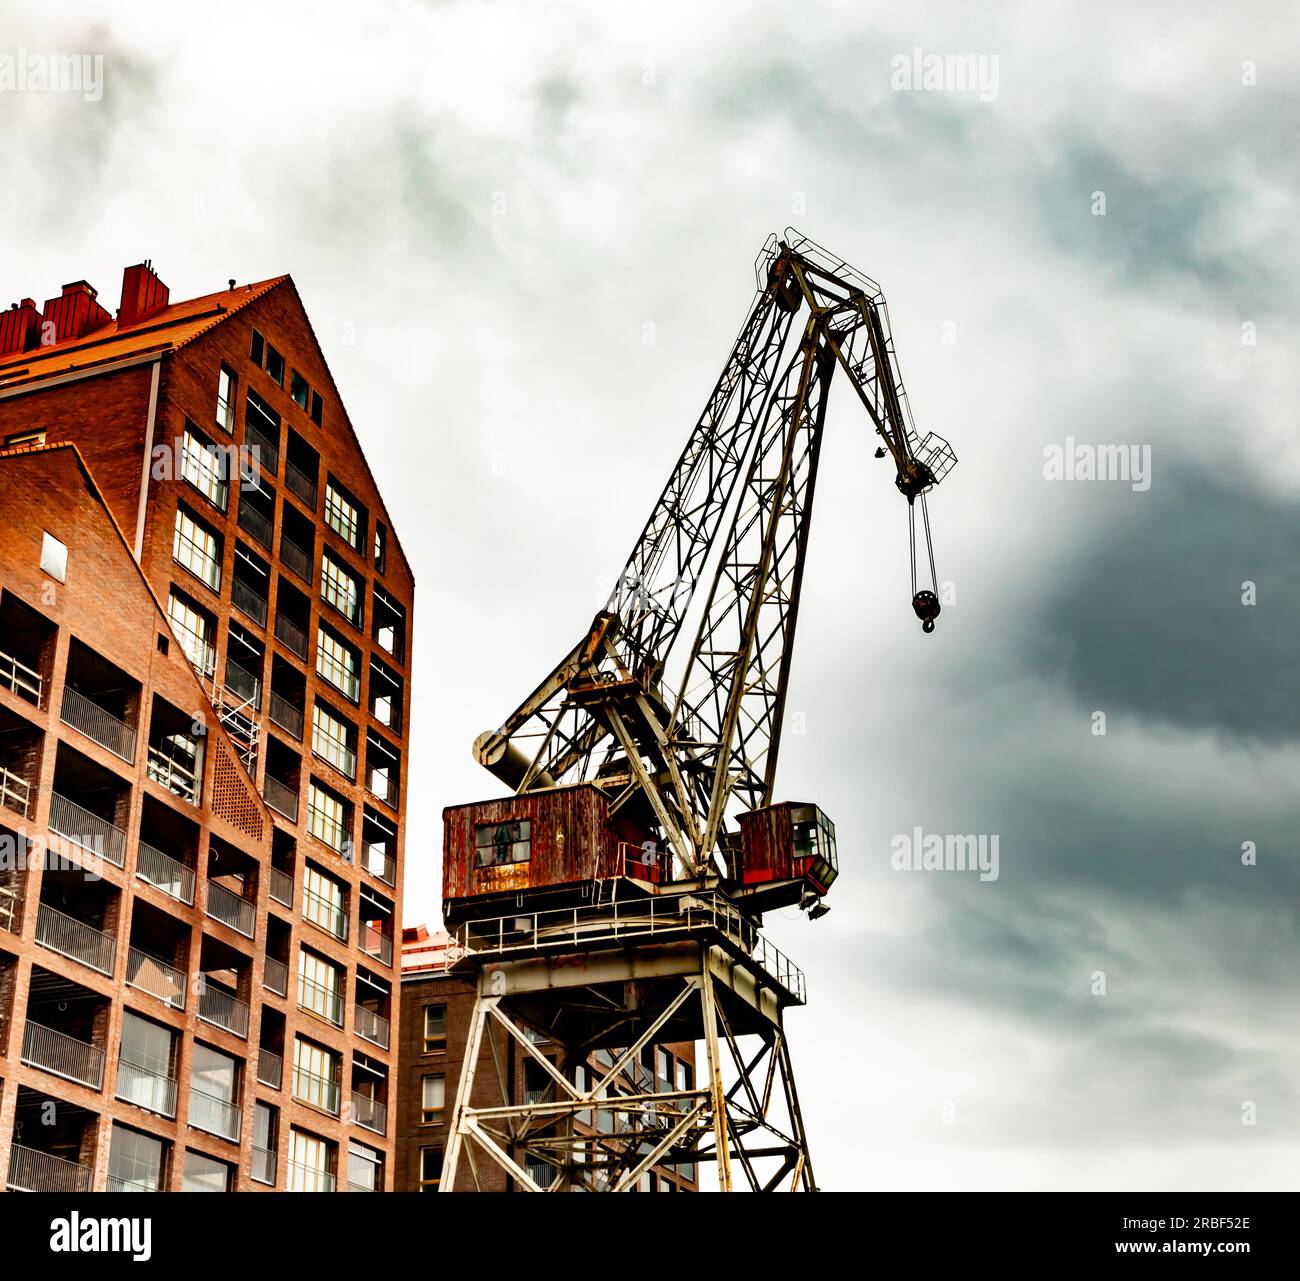 A new residential building under construction, replacing the now demolished Nosturi music venue, next to a decommissioned dock crane in Telakkakatu. Stock Photo